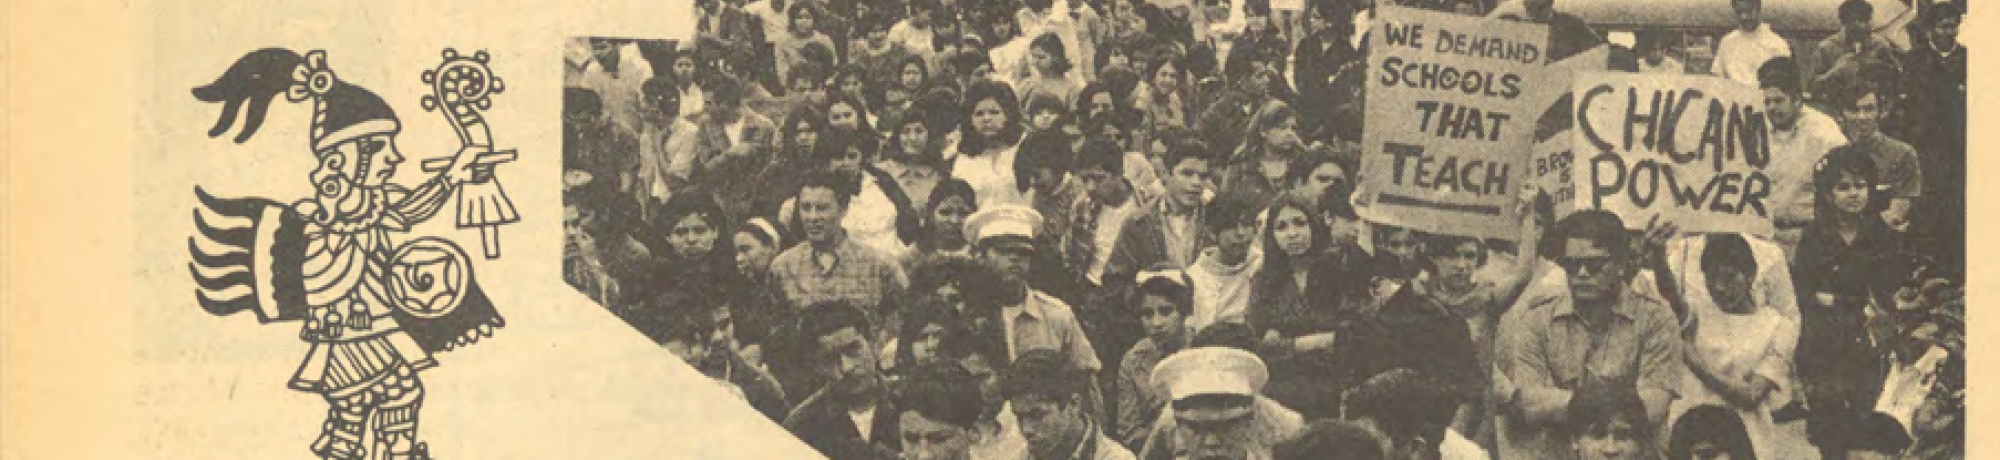 Photograph from 1968 Los Angeles, protesting discriminatory education policies. La Raza Yearbook, September 1968, page 16.